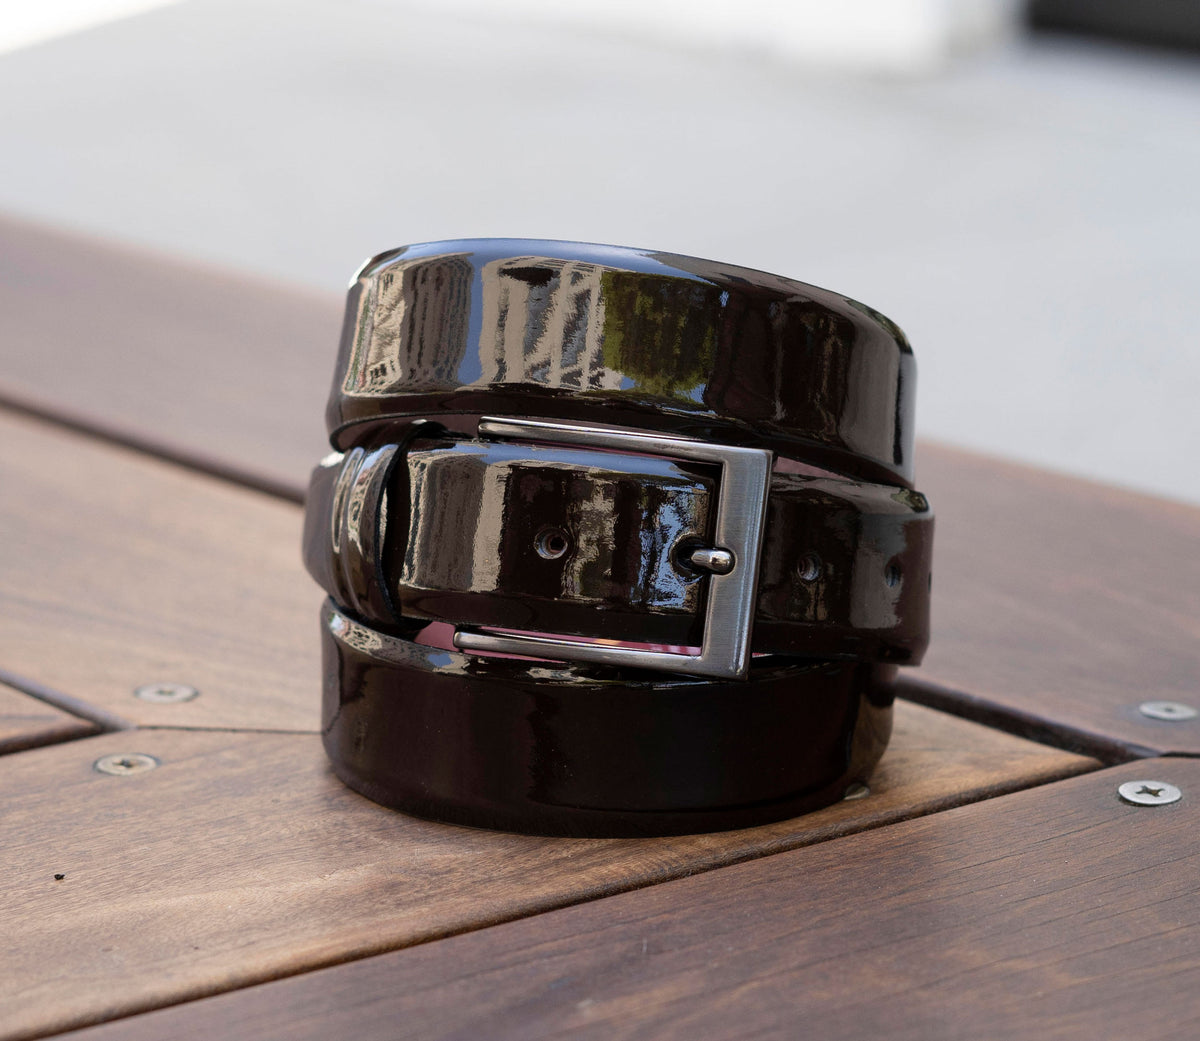 patent leather belts